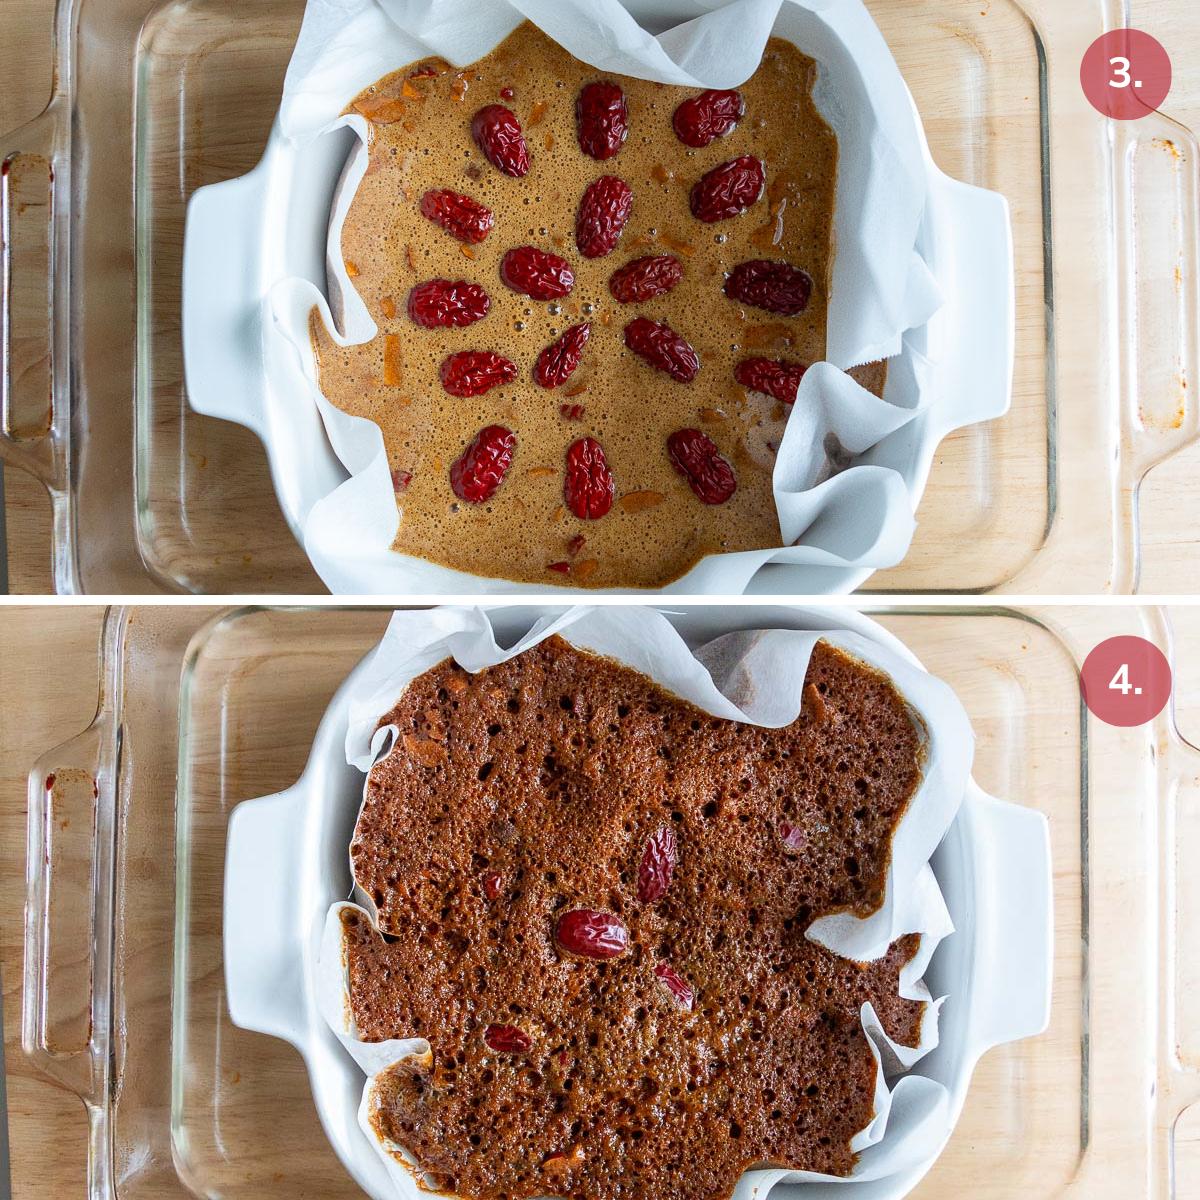 Gingerbread batter in a smaller 8 x 8 dish and then placed into a 9 x 13 pan with boiling water- showing before and after bread is done steaming in microwave. 